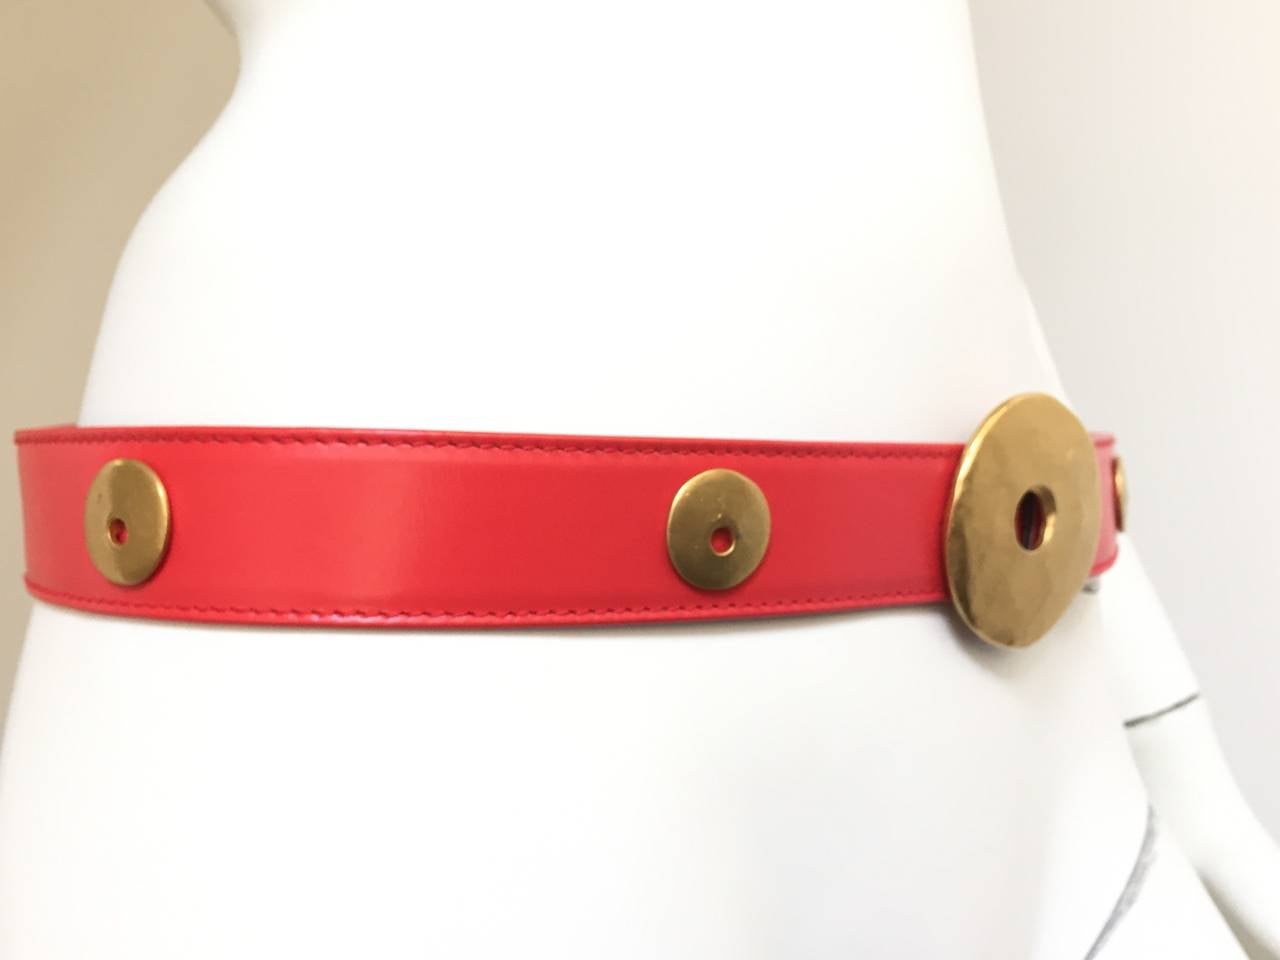 Escada 80s red leather with brass abstract circular shapes is a German size 42 which is an USA size 12. There are two holes on strap. 
Measurements are:
36